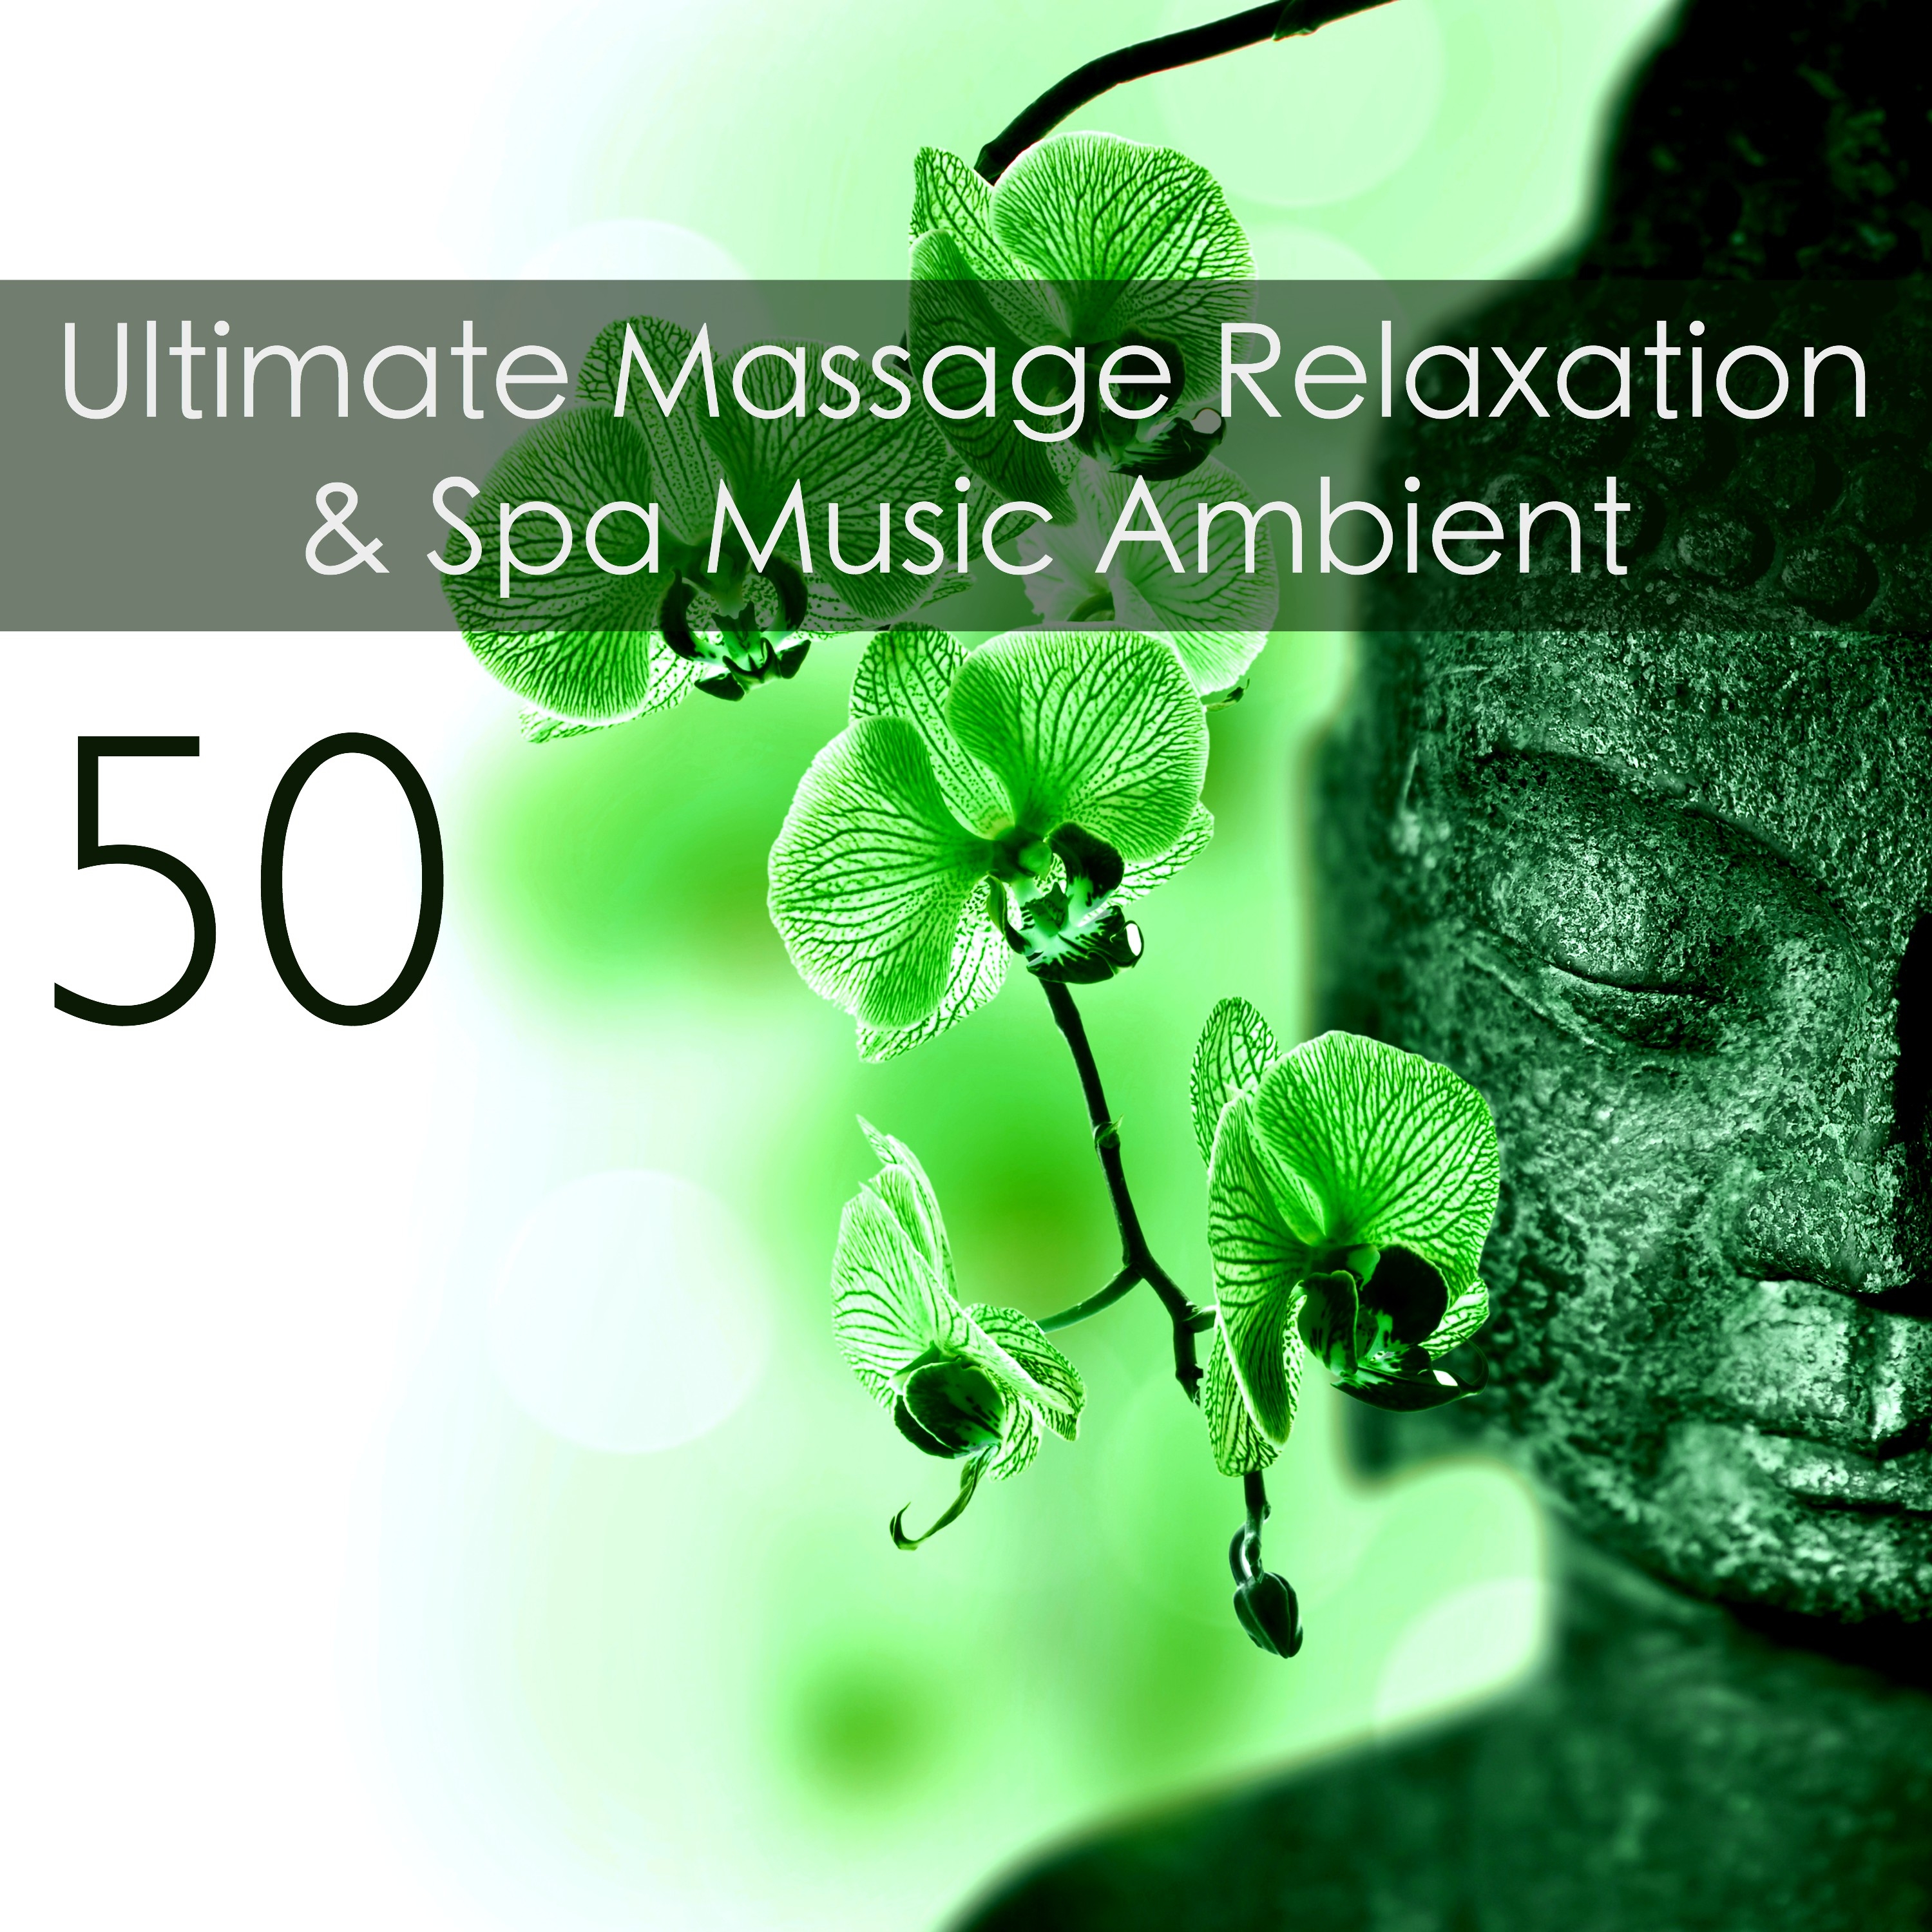 Ultimate Massage Relaxation & Spa Music Ambient 50